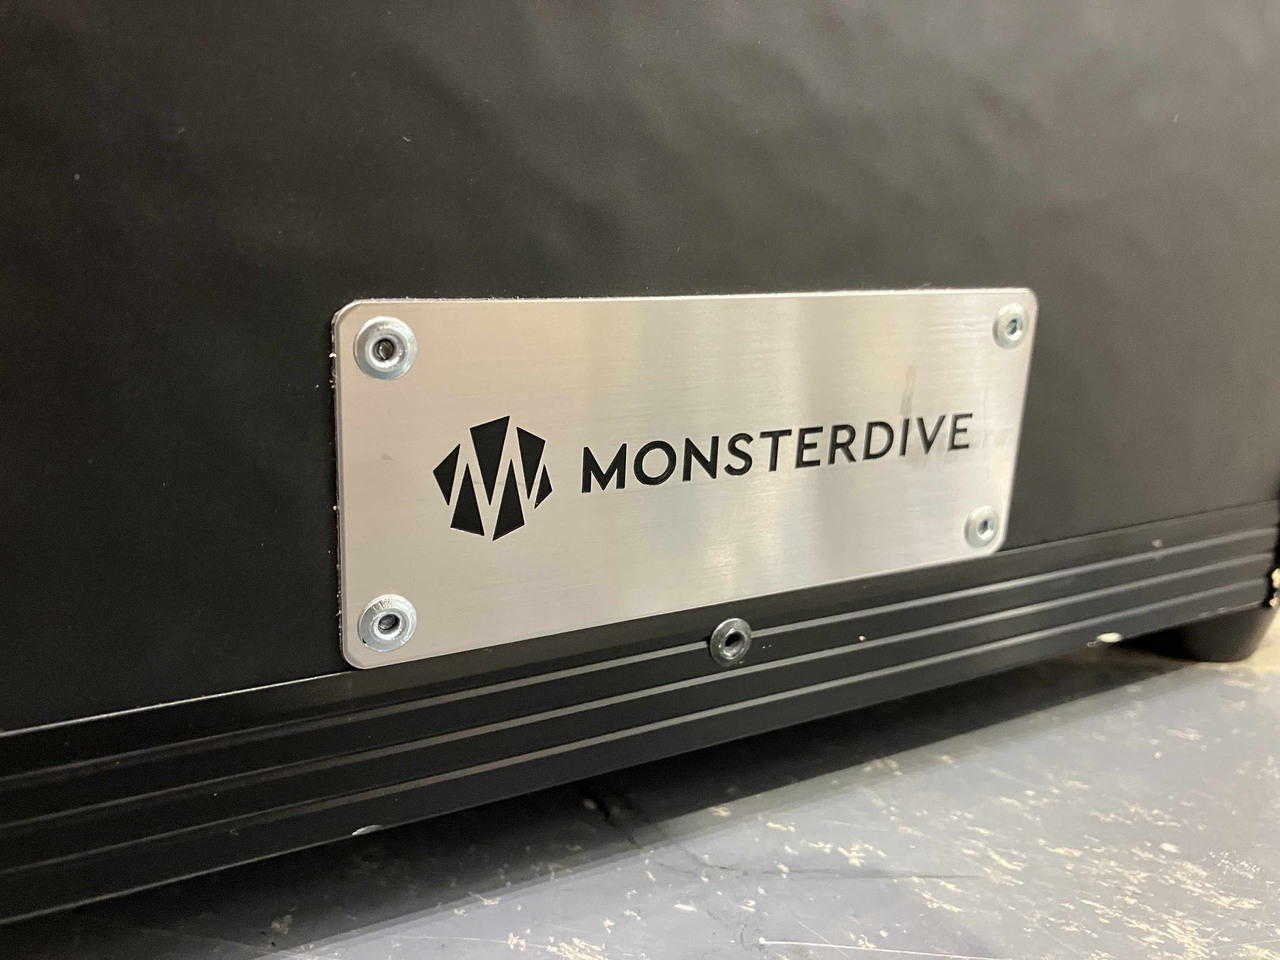 MONSTER DIVEの存在感！